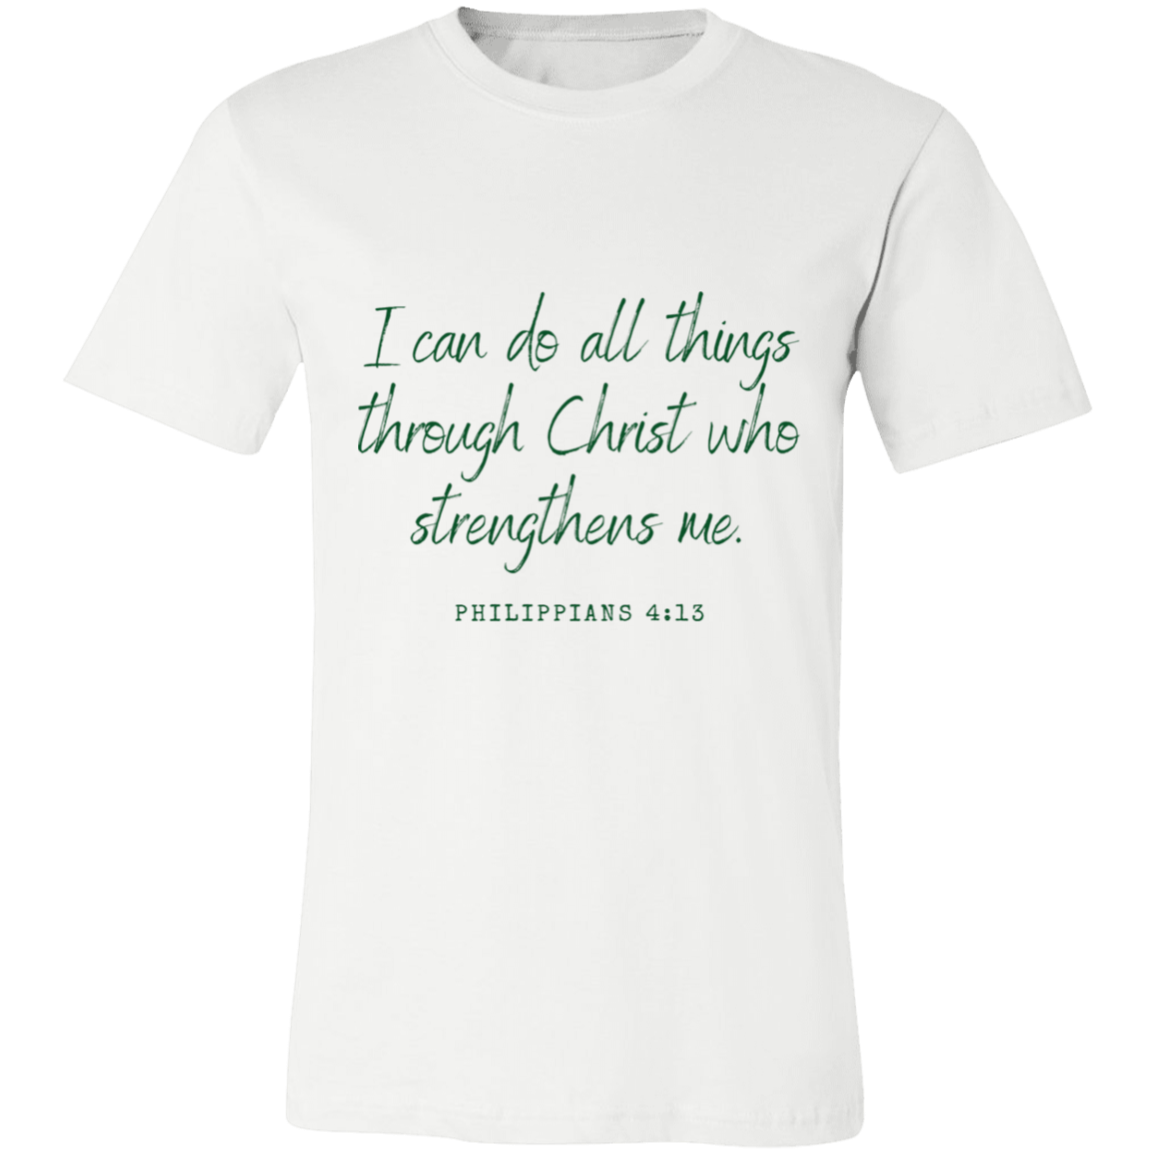 I Can Do All Things - Jersey Short-Sleeve T-Shirt